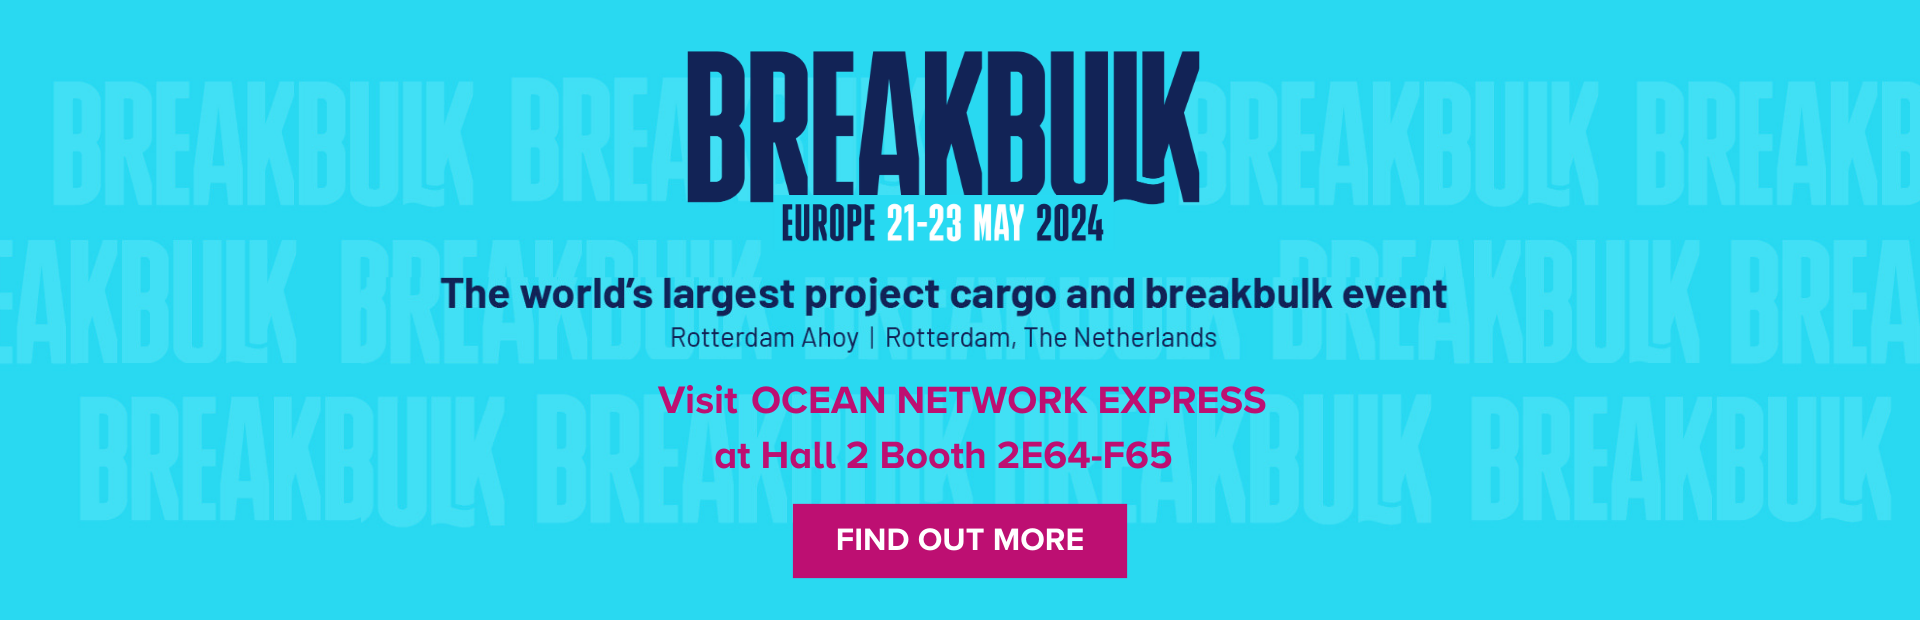 The world's largest project cargo and breakbulk event